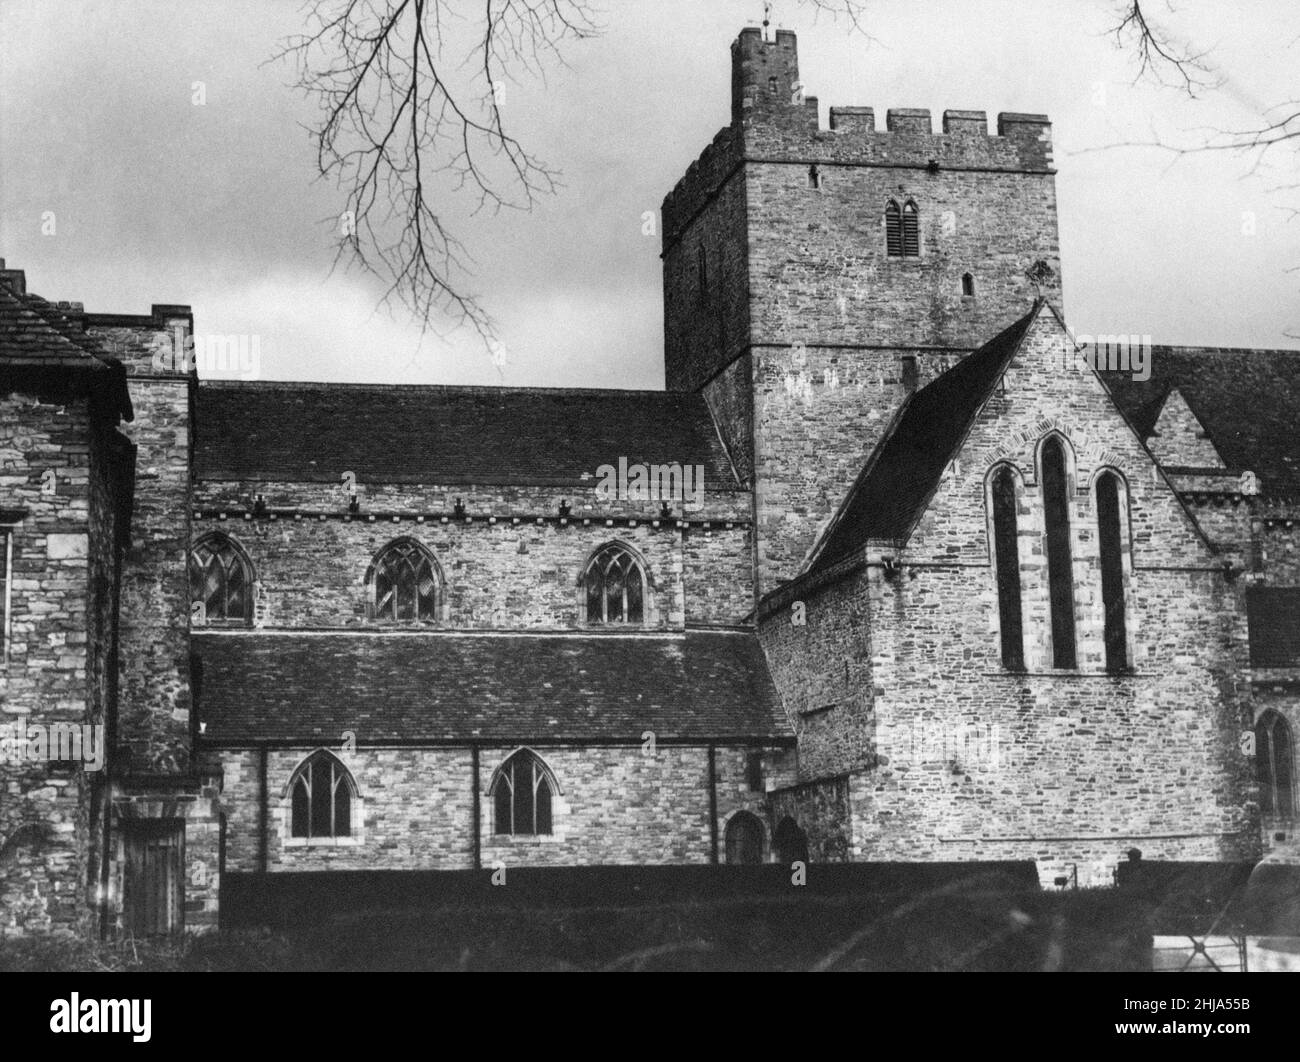 Brecon Cathedral, Brecon, a market town and community in Powys, Mid Wales, April 1962. Brecon Cathedral is the cathedral of the Diocese of Swansea and Brecon in the Church in Wales and seat of the Bishop of Swansea and Brecon. Stock Photo